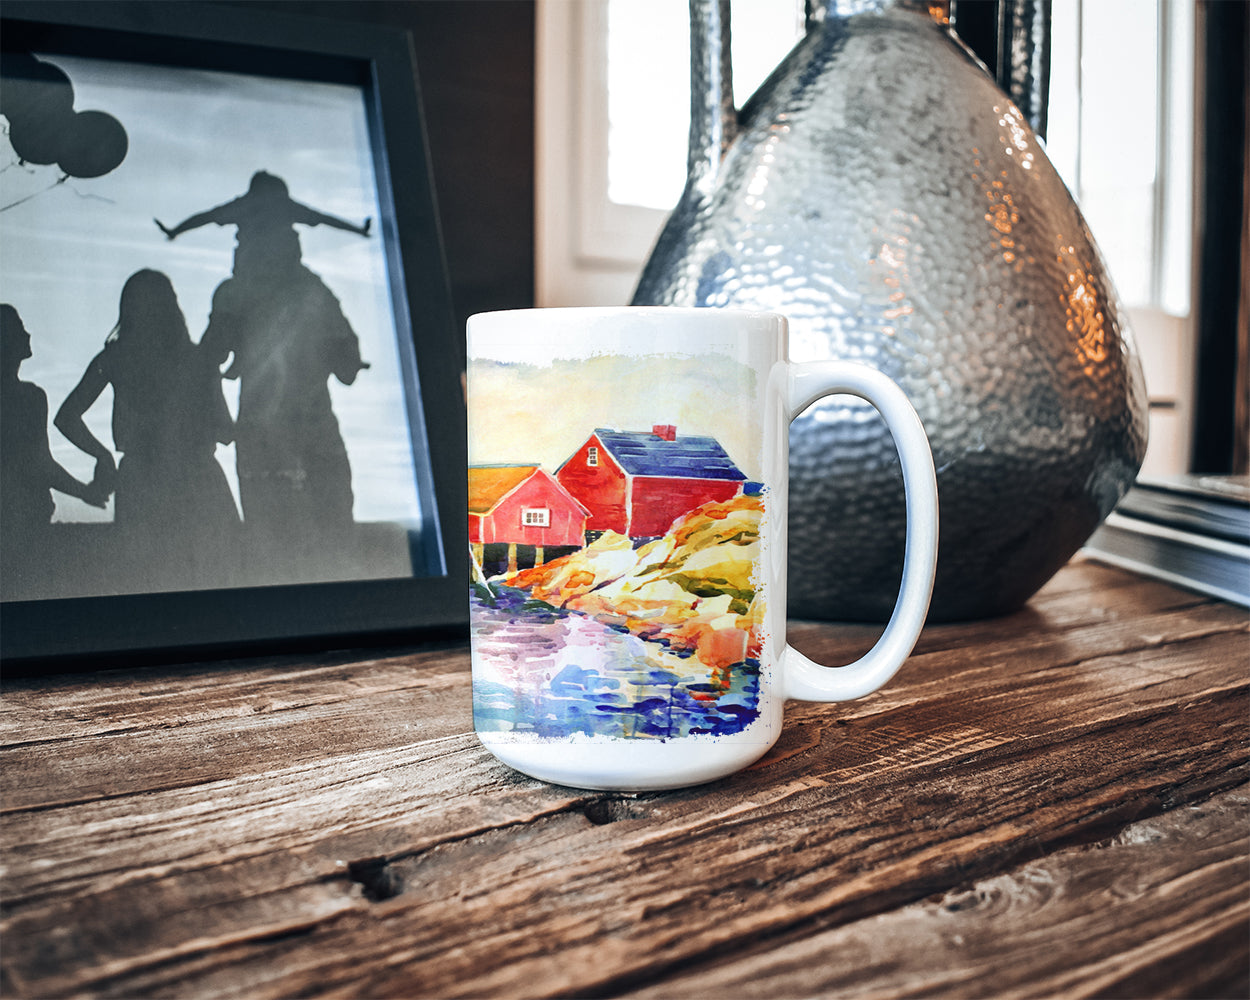 Boats at Harbour with a view Dishwasher Safe Microwavable Ceramic Coffee Mug 15 ounce 6059CM15  the-store.com.